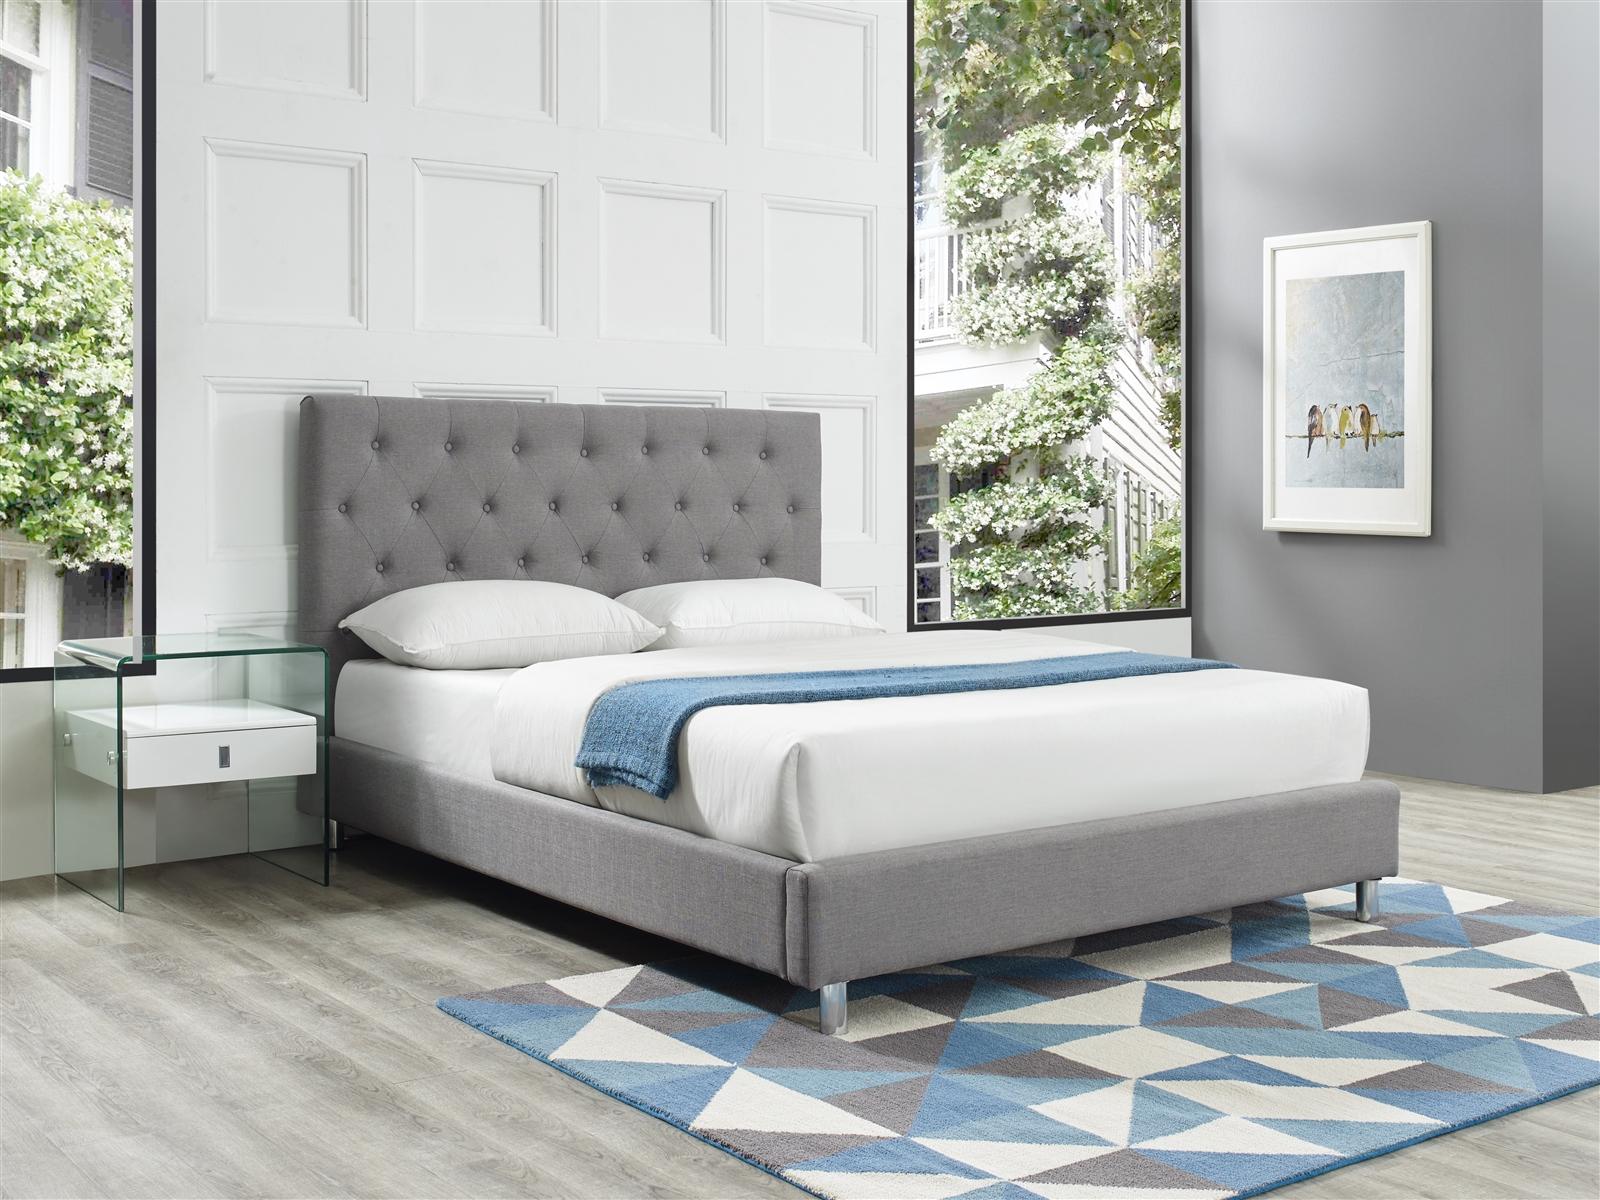 Contemporary, Modern Platform Bed MILES II CB-233-Q-GRAY in Gray Polyester